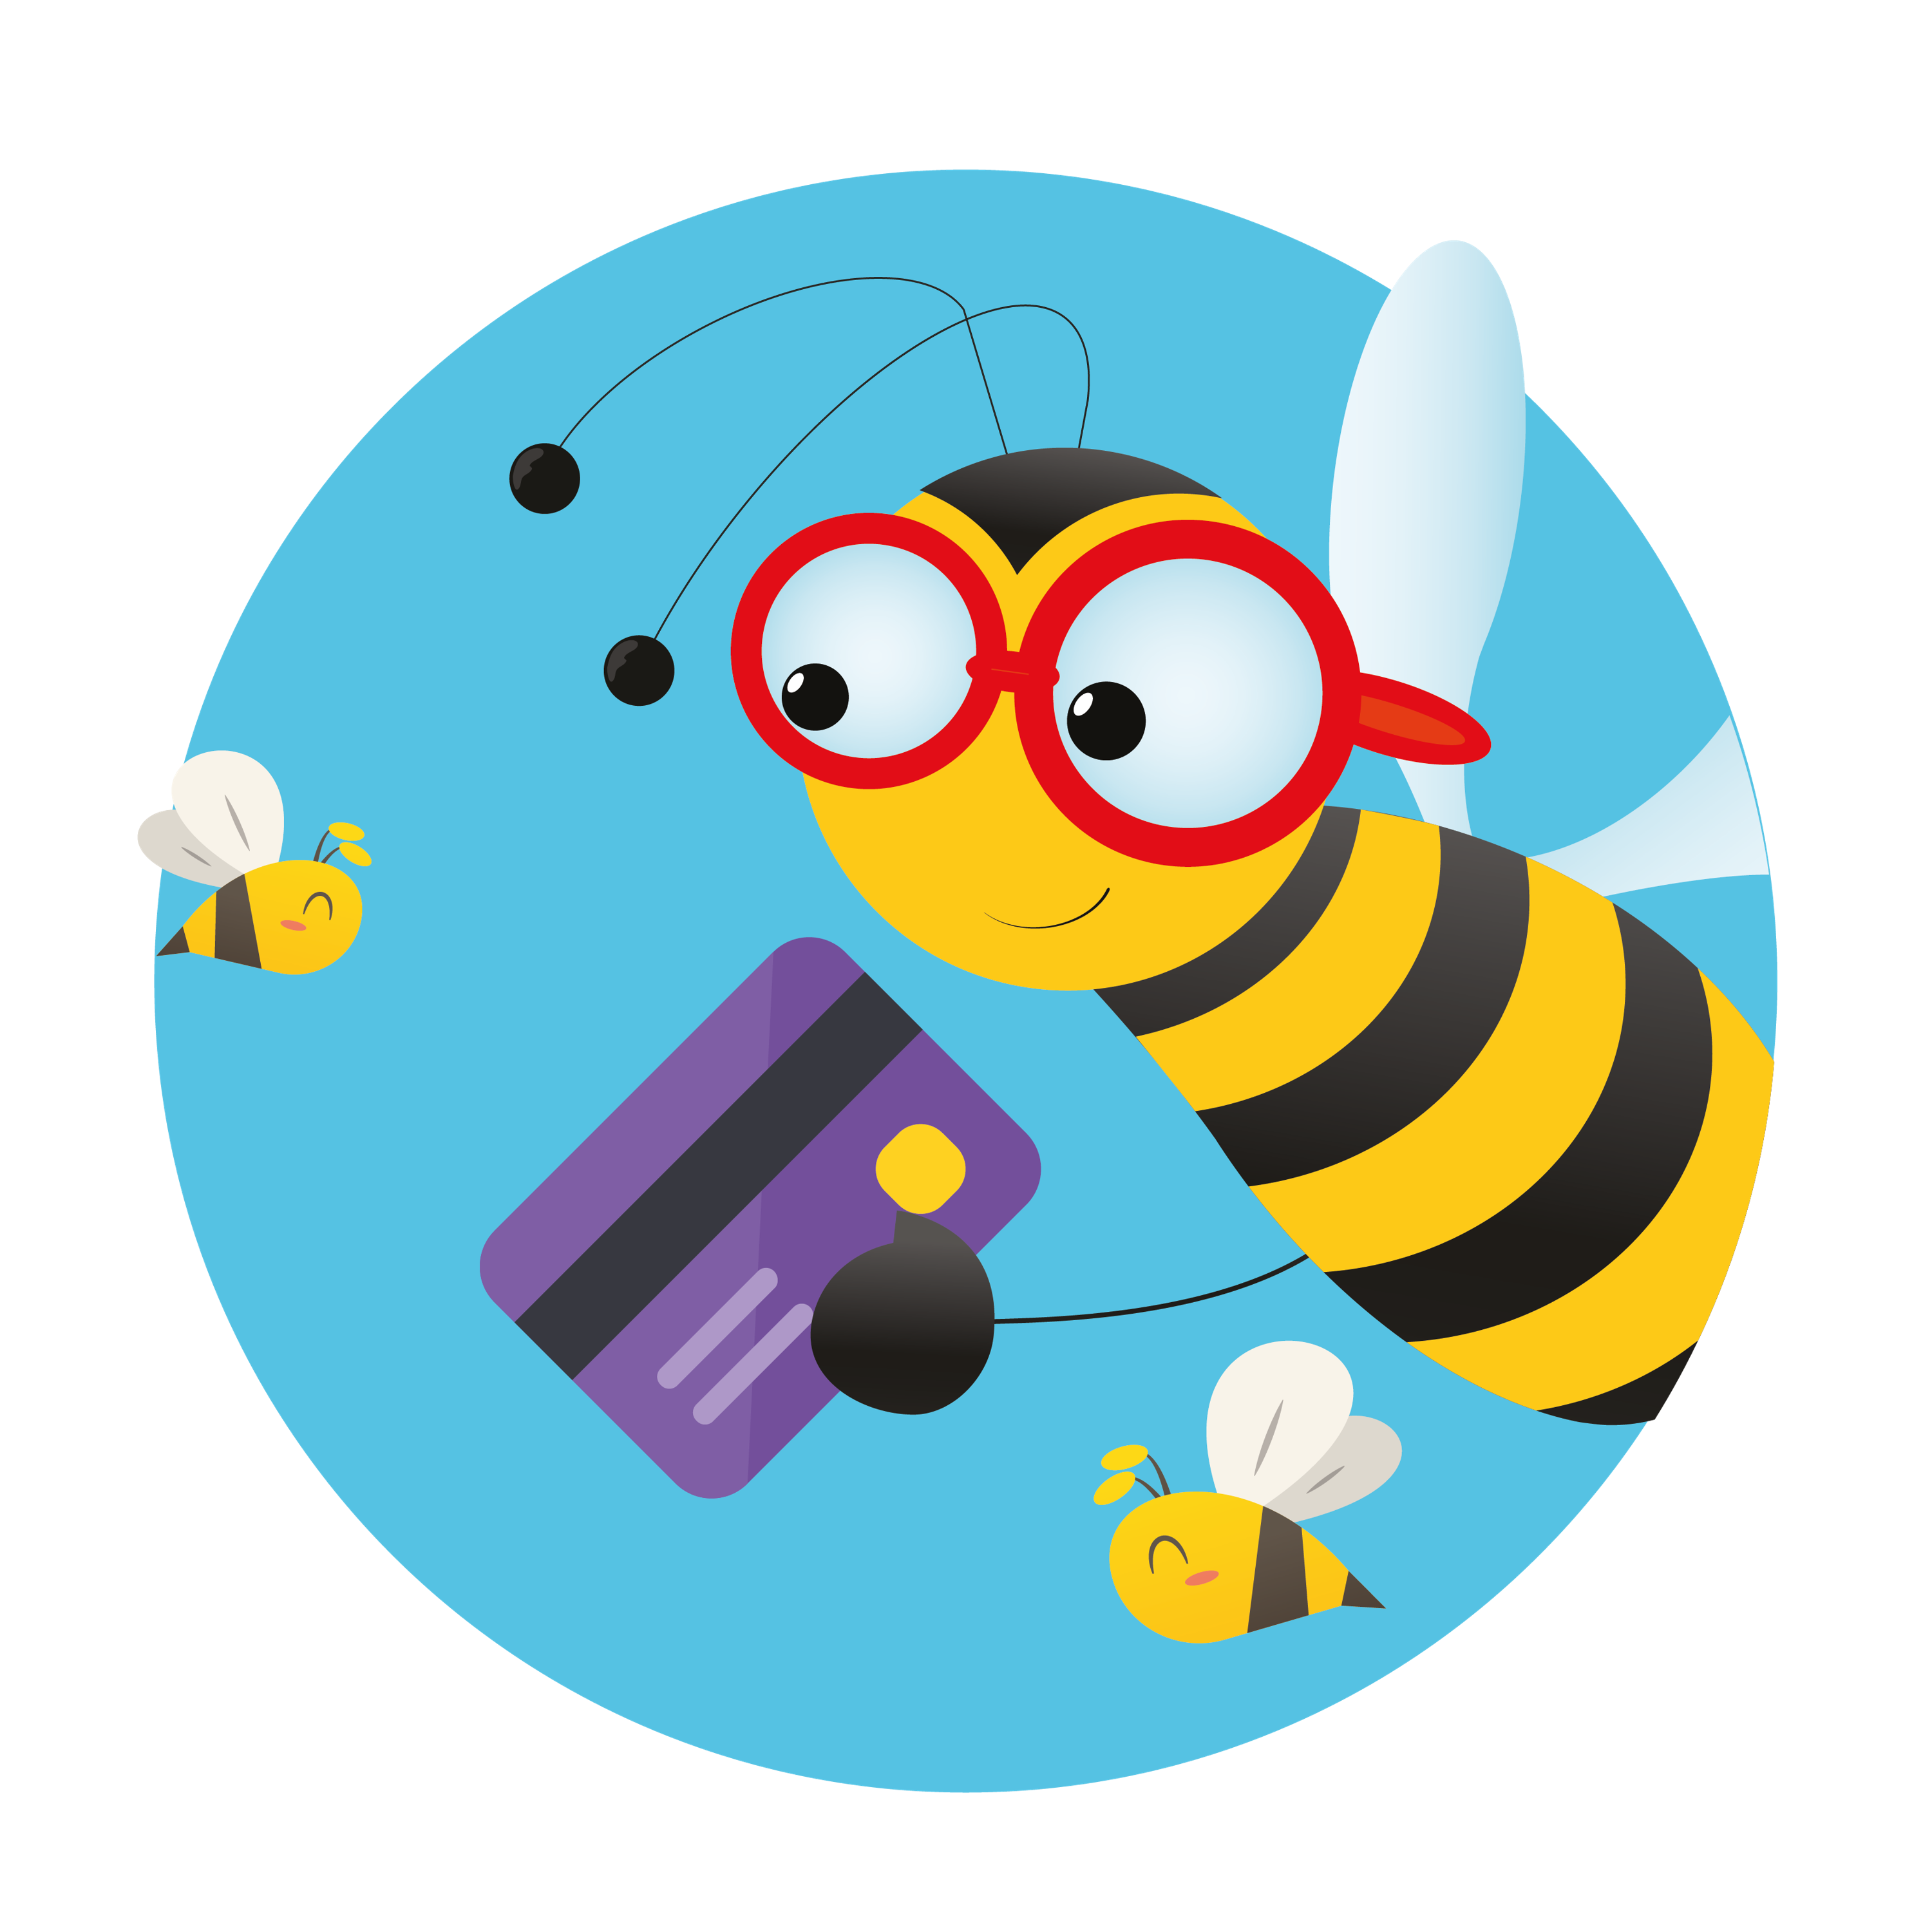 Bee holding a payment card for the PAYG PlanBee membership